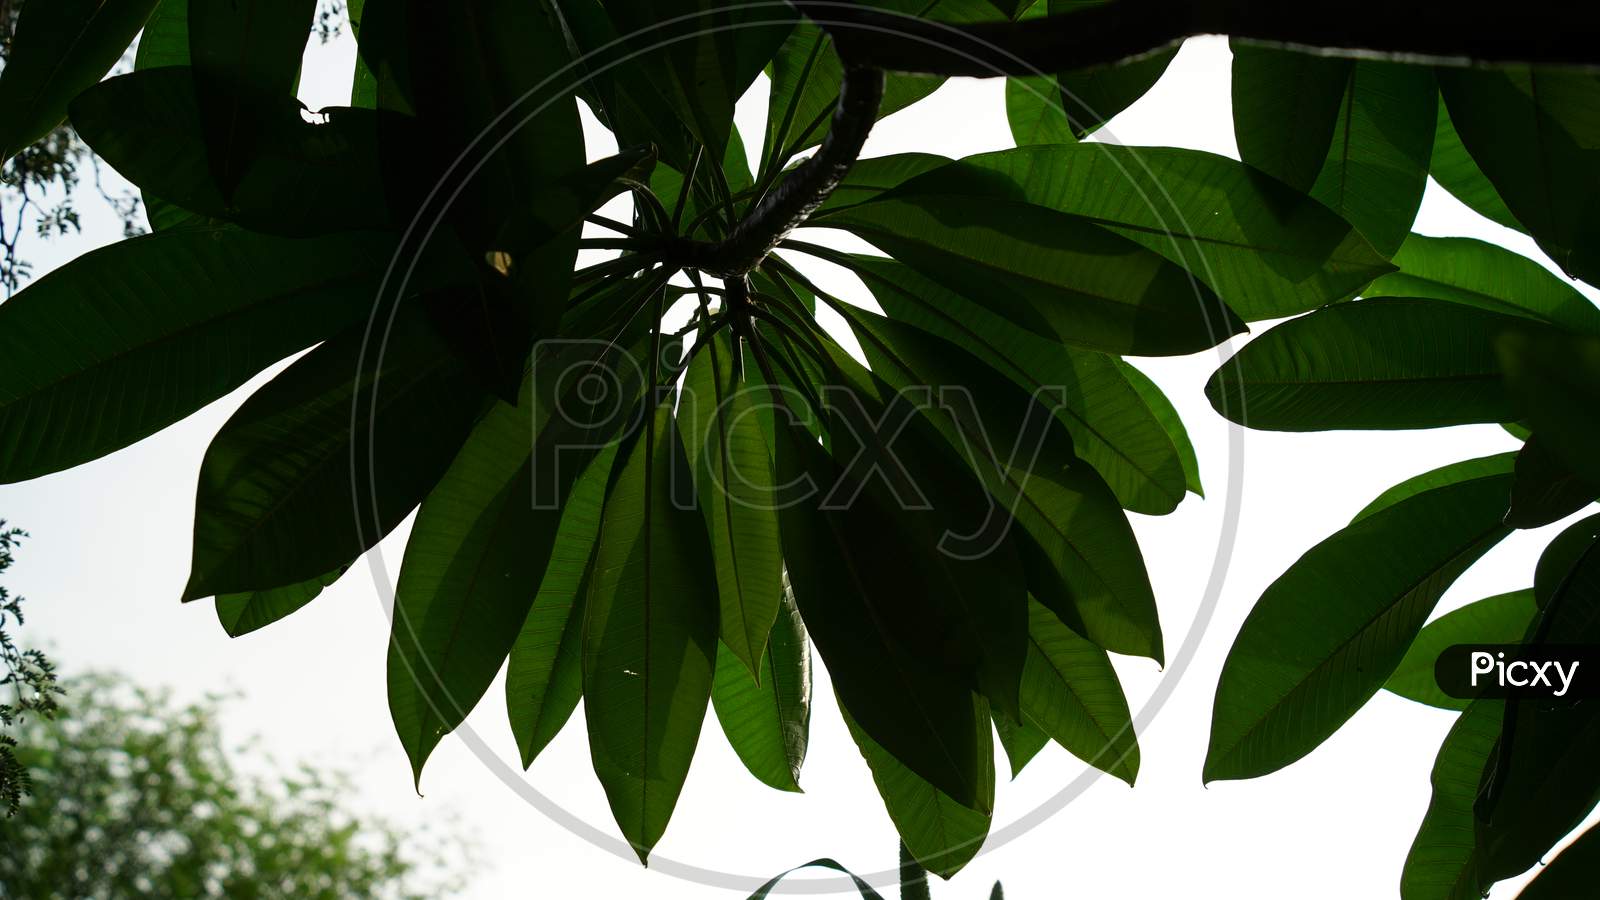 Selective Focus On Green Leaves Of Shadowed Tree With Attractive Greenish Pigment